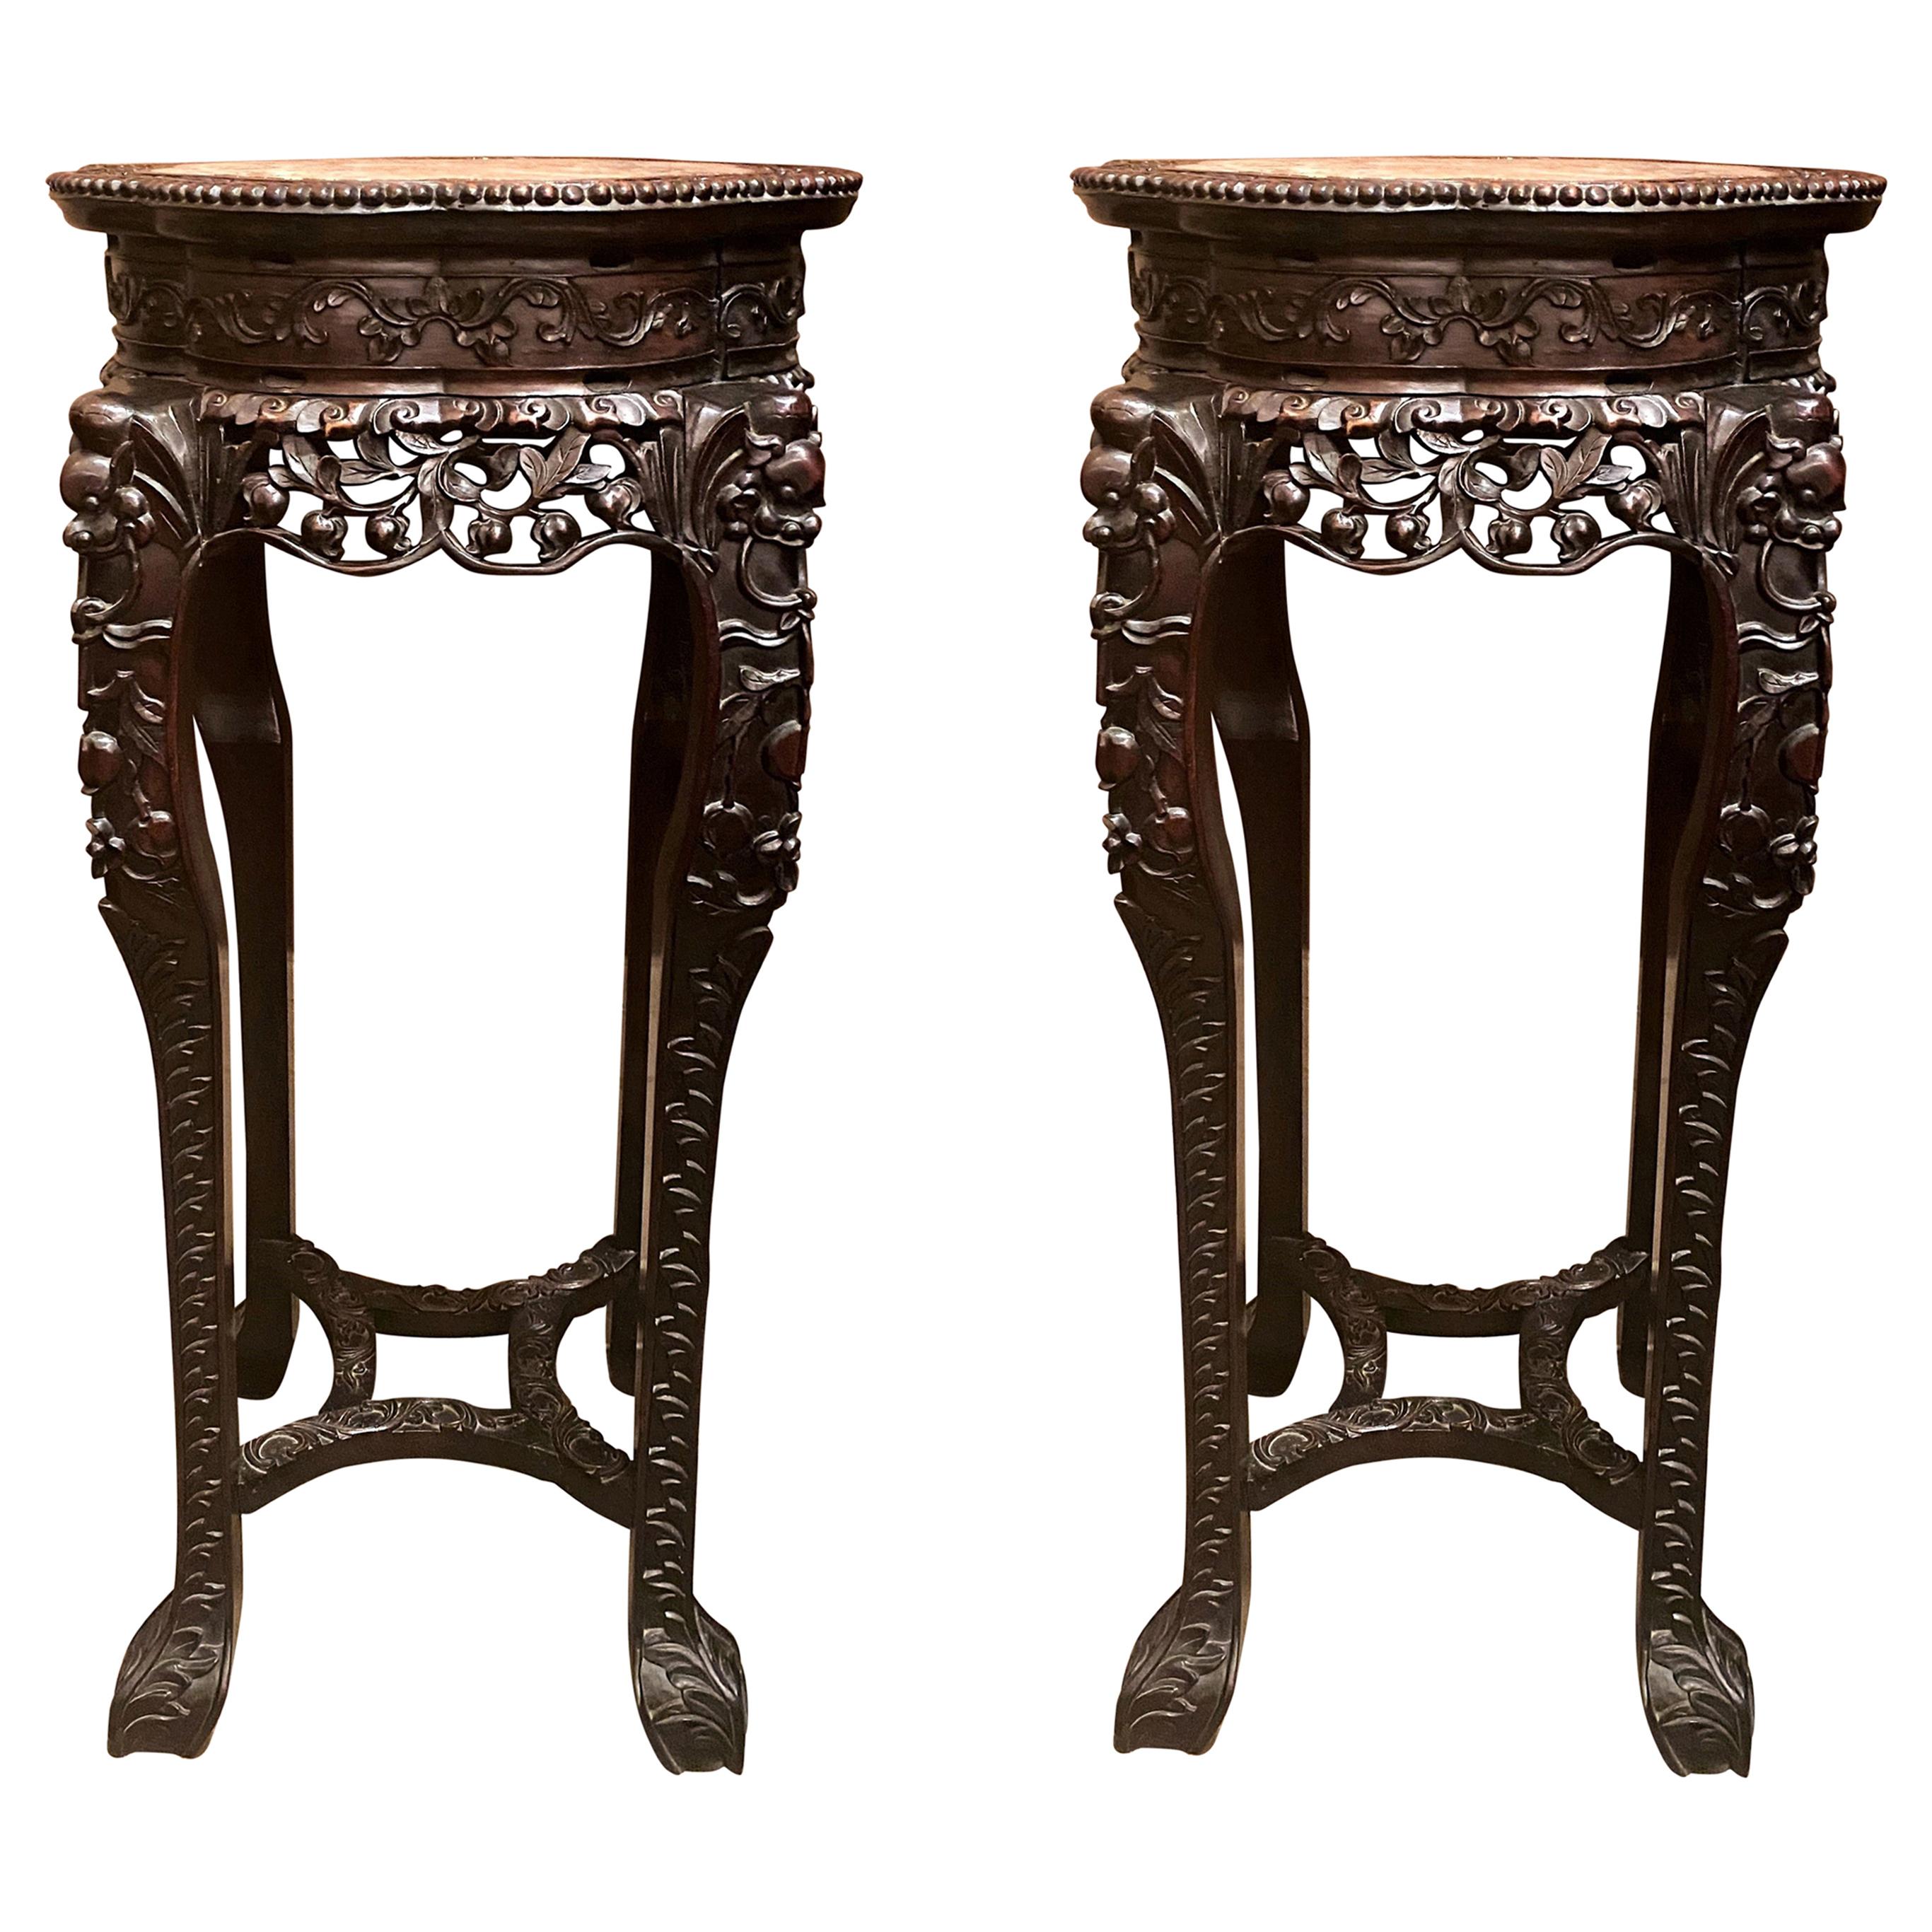 Pair of Antique 19th Century Carved Teak Stands with Marble Tops